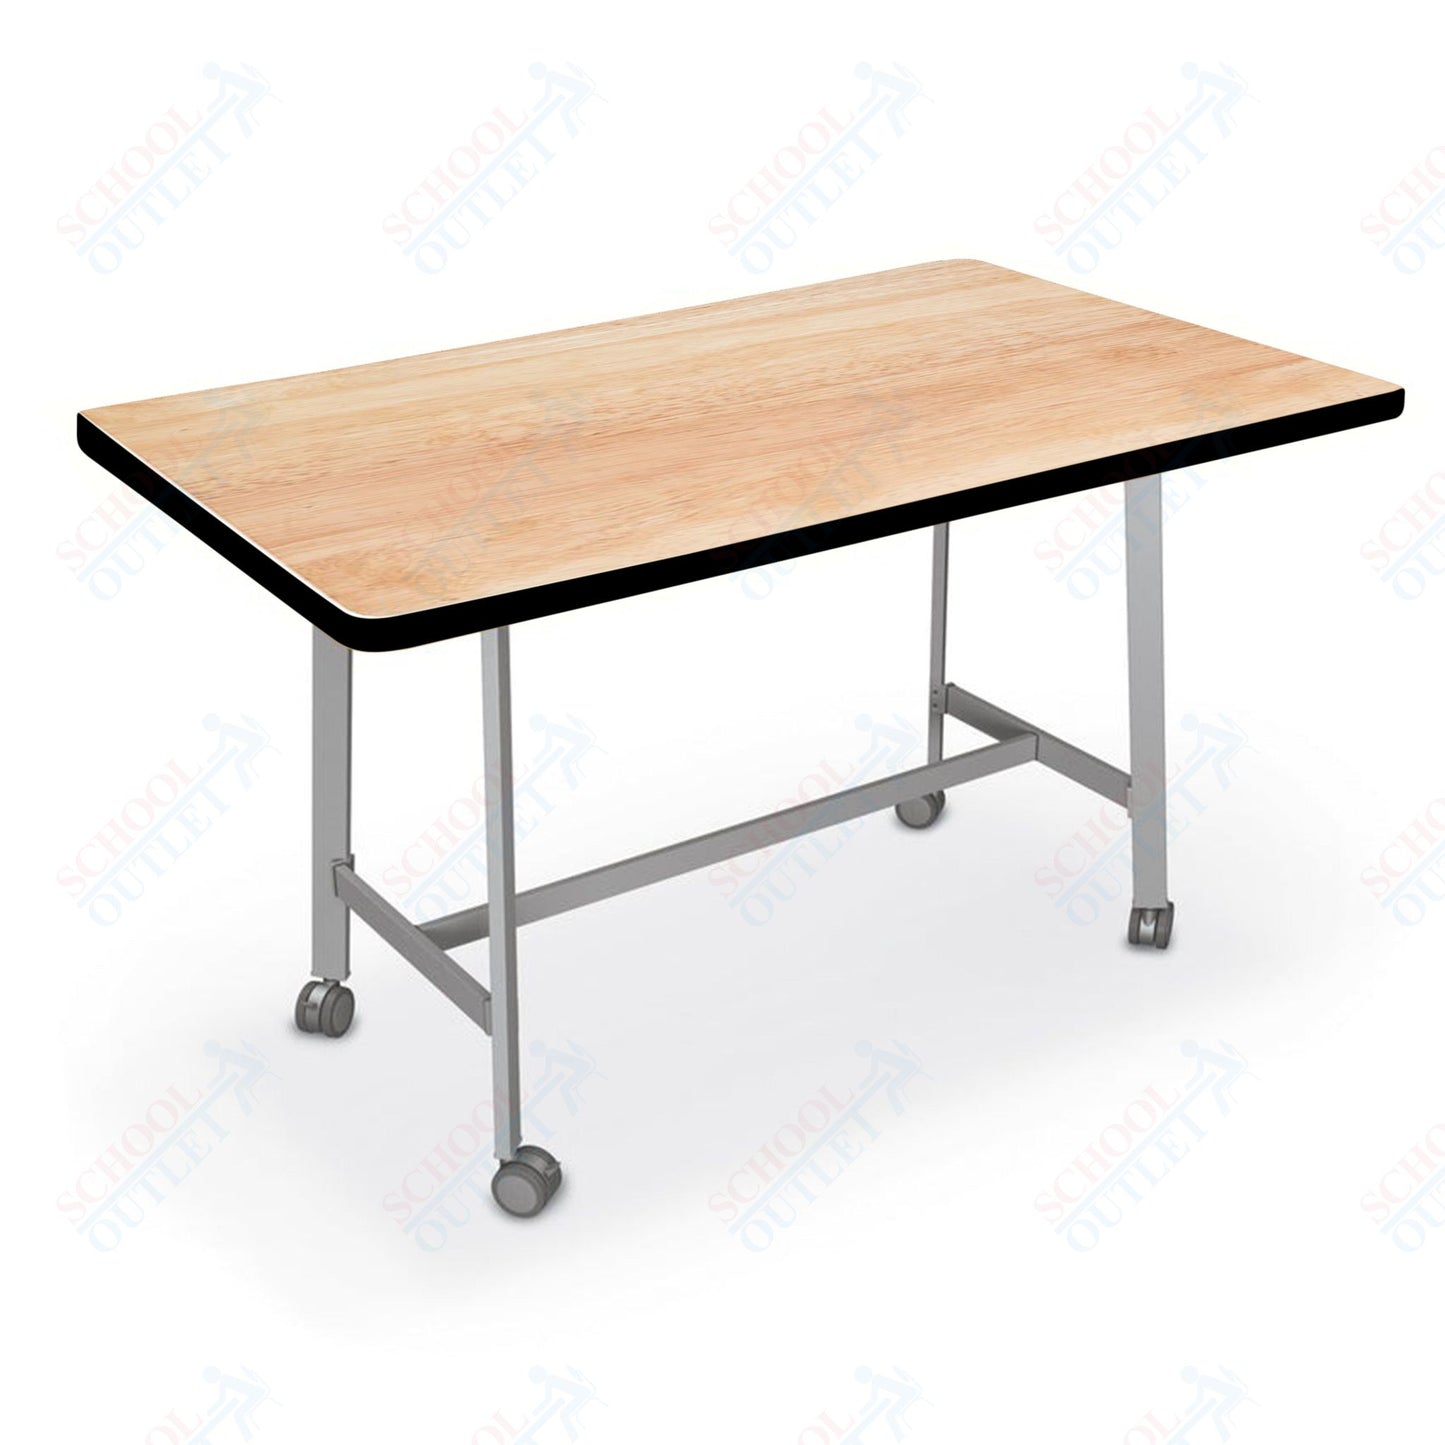 Mooreco Akt Table – 36"D x 60"W Rectangle, Laminate or Butcher Block Top, Fixed Height Available in 29"H, 36"H, or 42"H